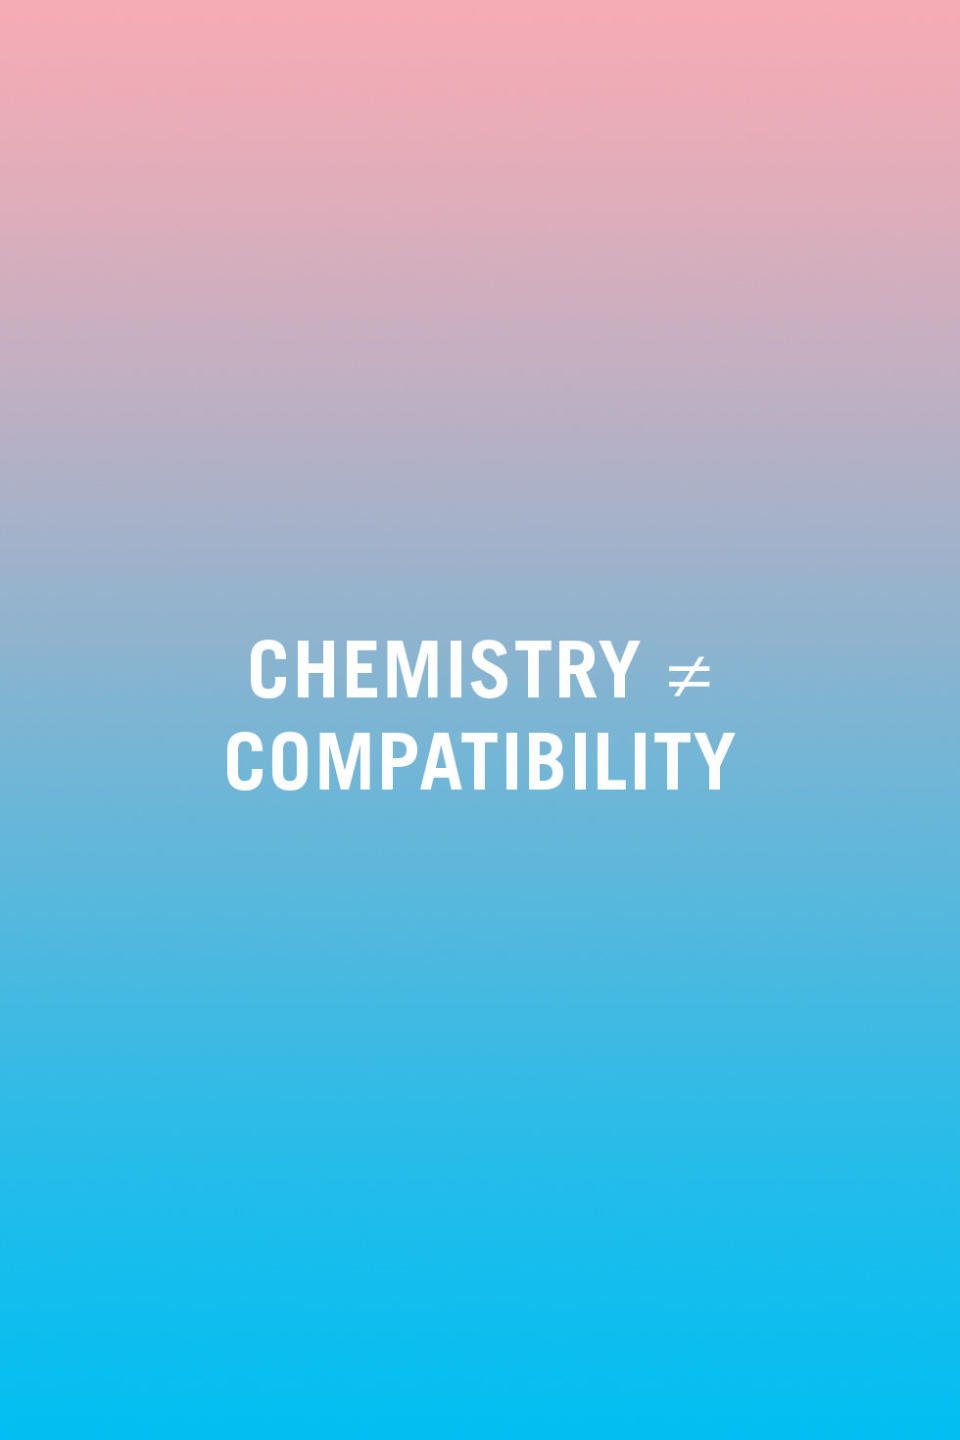 <p>"People confuse chemistry for compatibility. You can have chemistry with a lot of people, but that doesn't mean you are compatible. In order to be compatible, you need to share basic core beliefs, values, and agendas. Chemistry is what sweeps people off their feet in the beginning, but you need to be compatible with one another if you're going to make it over the long haul." —<em>Morin</em></p>